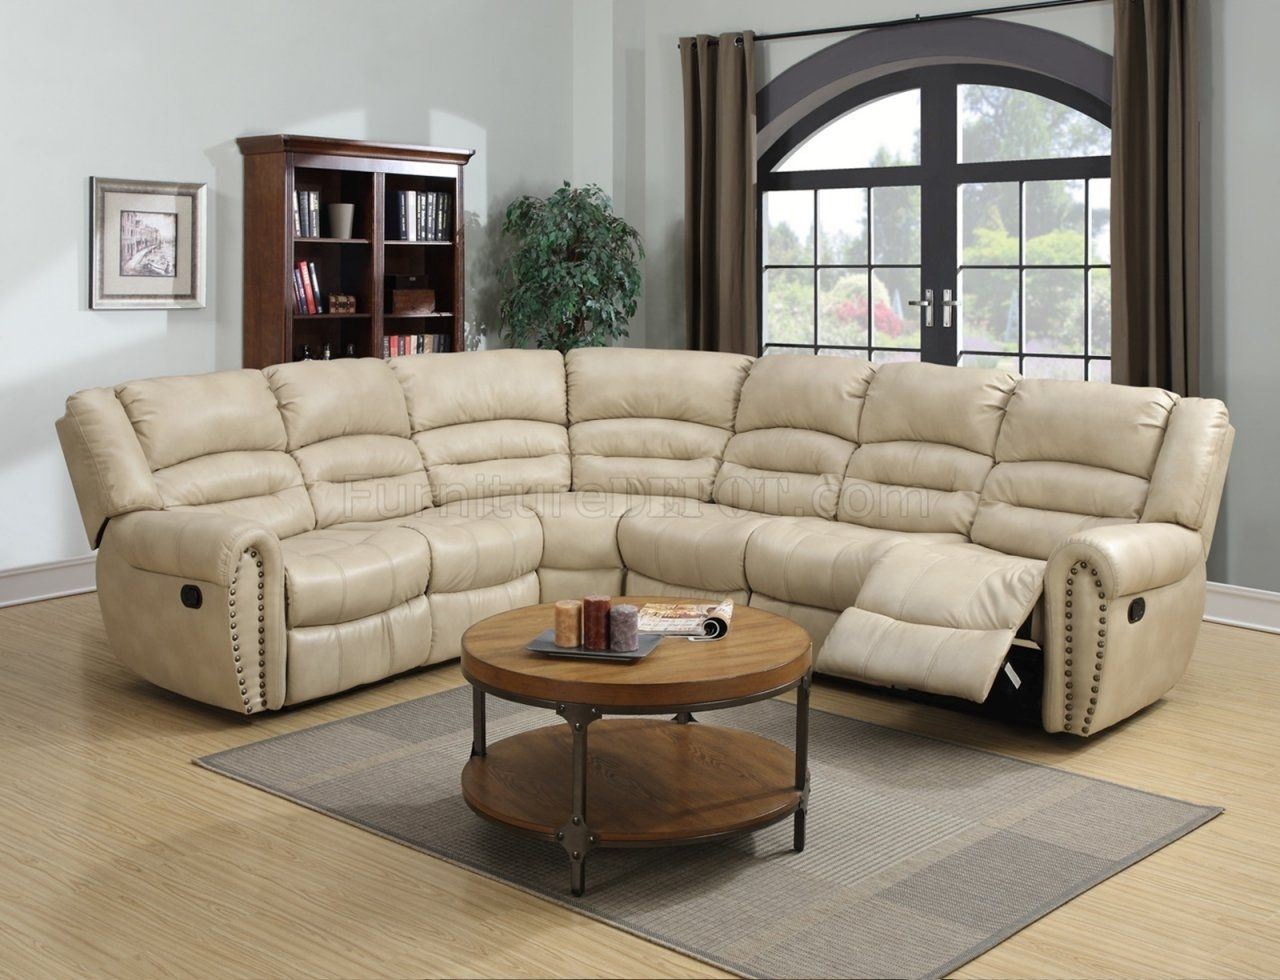 G687 Motion Sectional Sofa In Beige Bonded Leatherglory For Leather Motion Sectional Sofas (View 2 of 10)